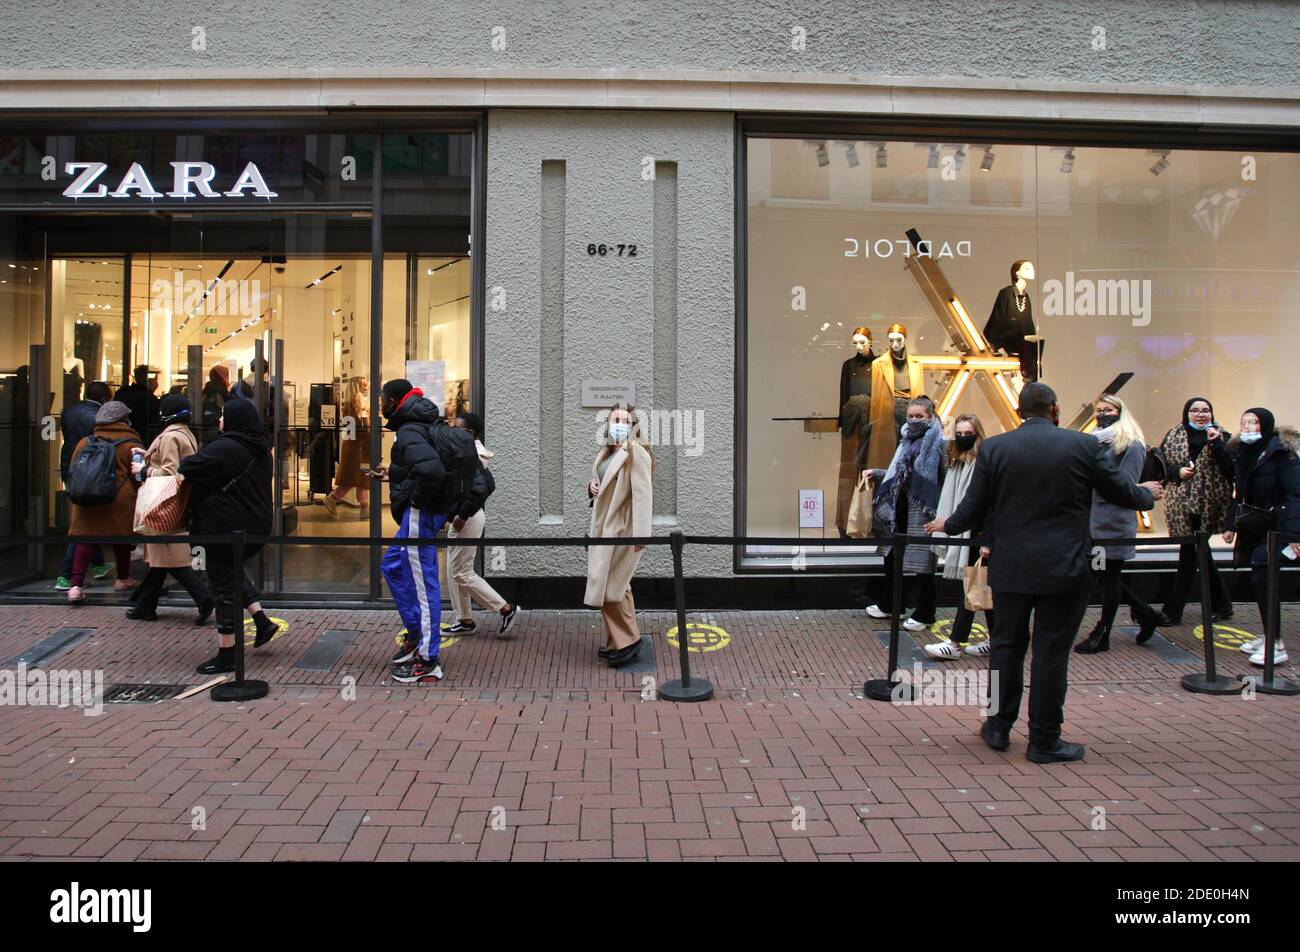 Page 2 - Zara Store High Resolution Stock Photography and Images - Alamy